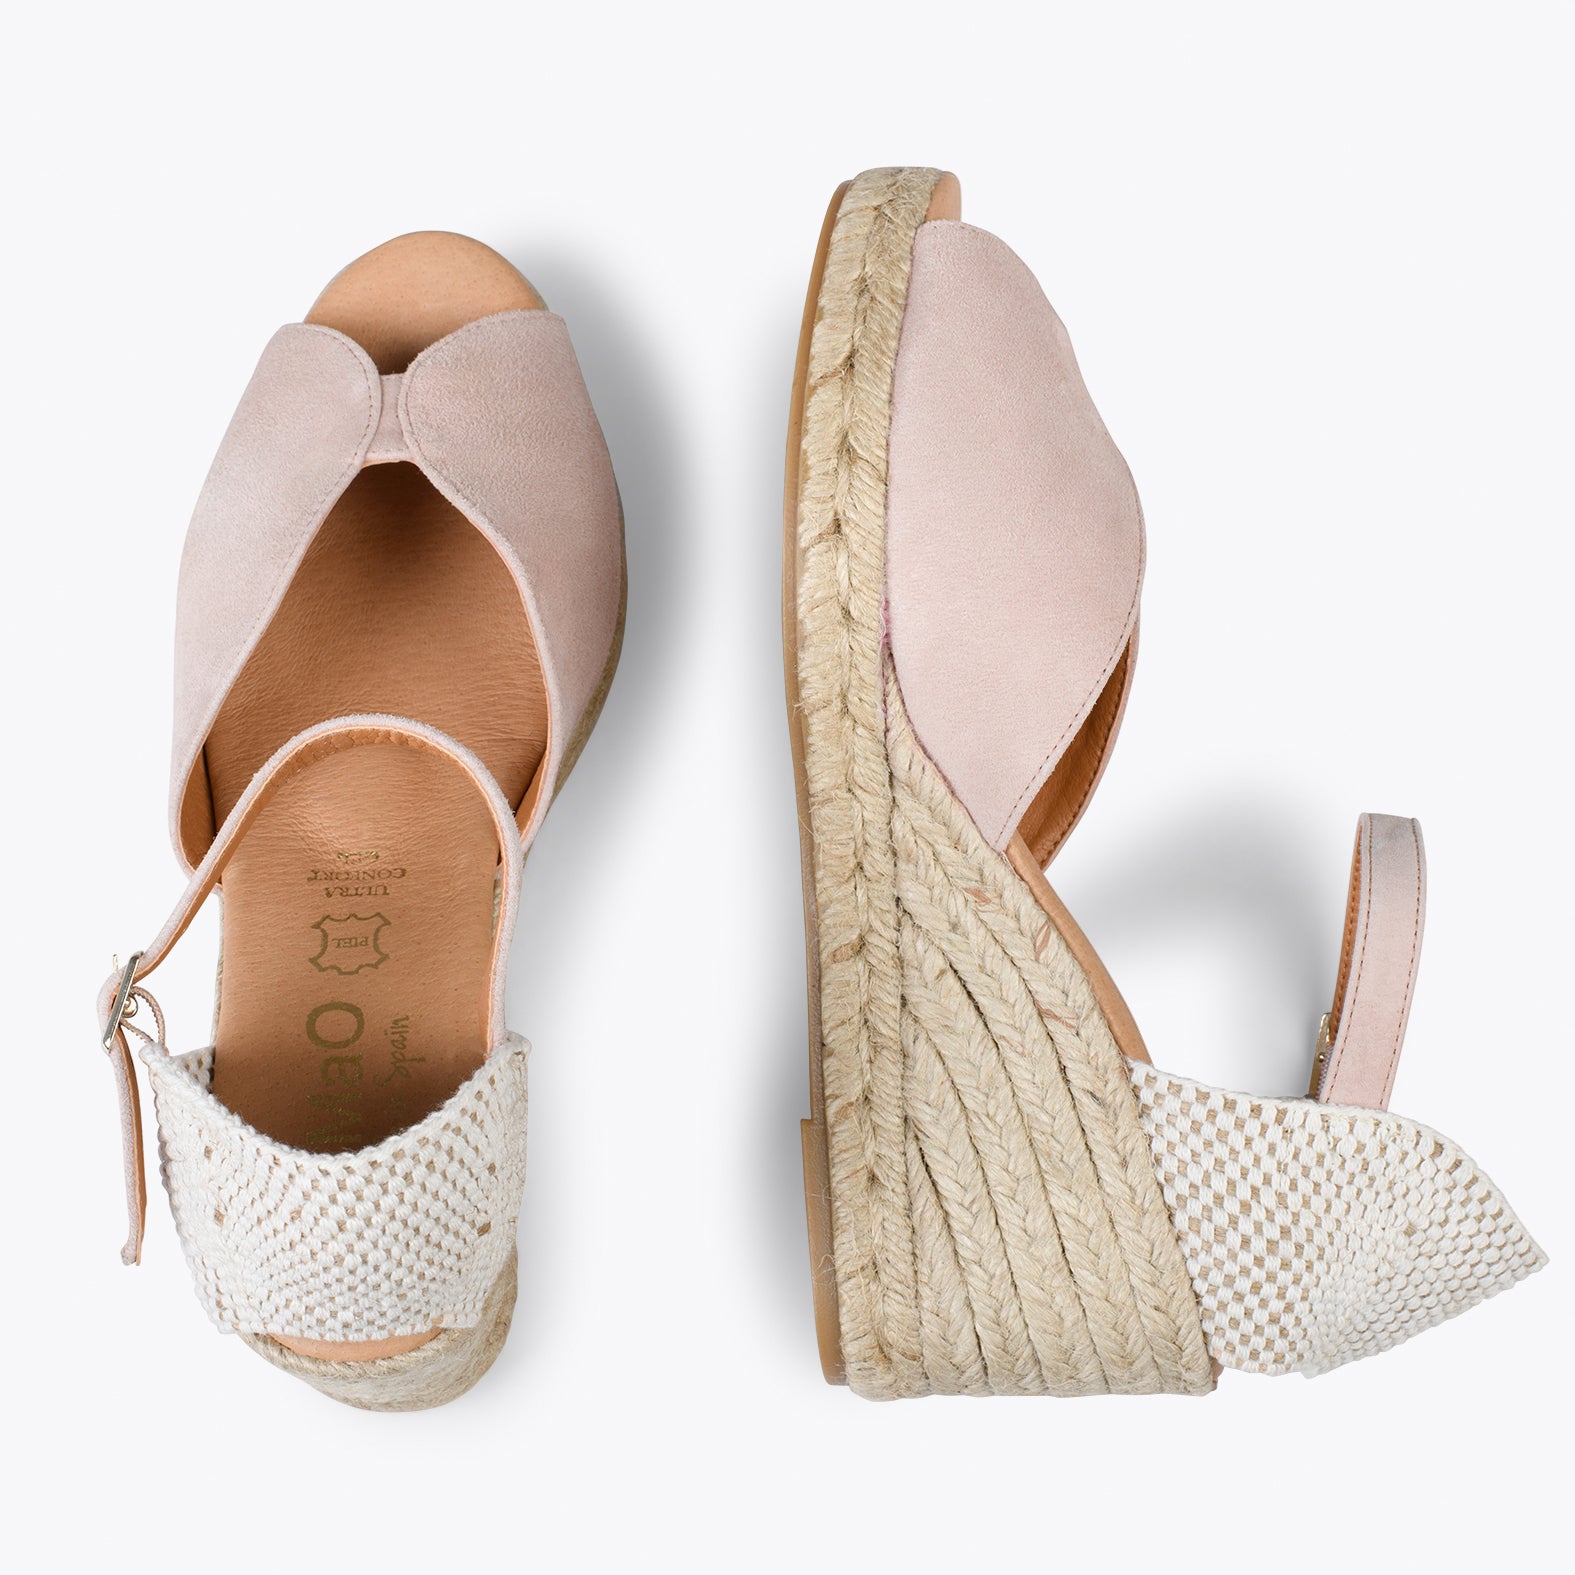 SITGES – NUDE espadrille wedges with double shovel